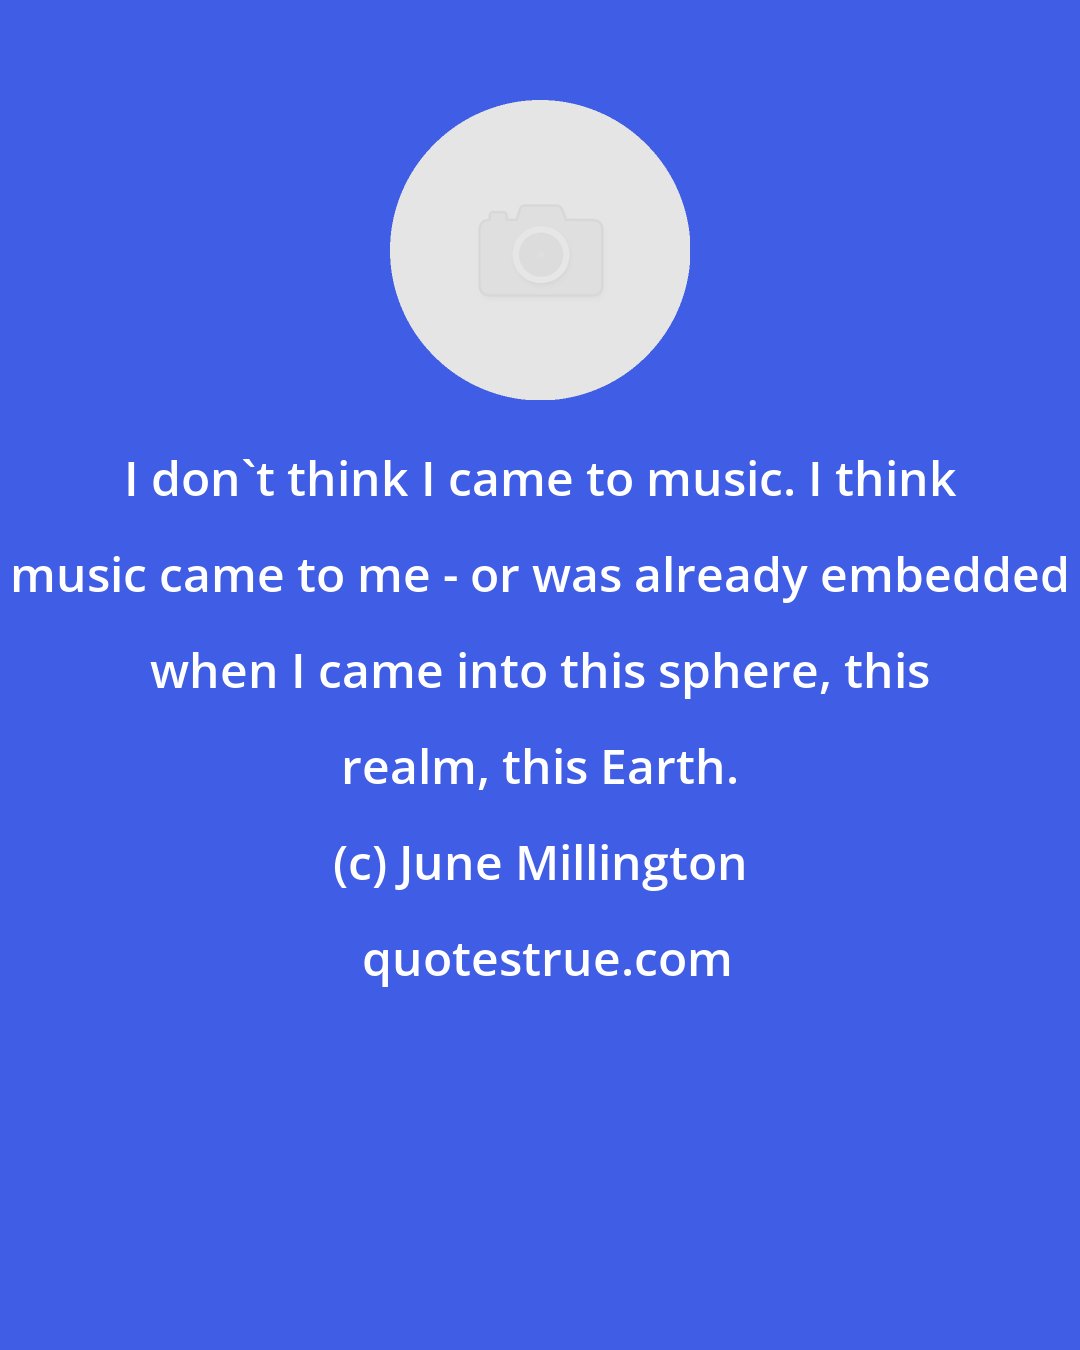 June Millington: I don't think I came to music. I think music came to me - or was already embedded when I came into this sphere, this realm, this Earth.